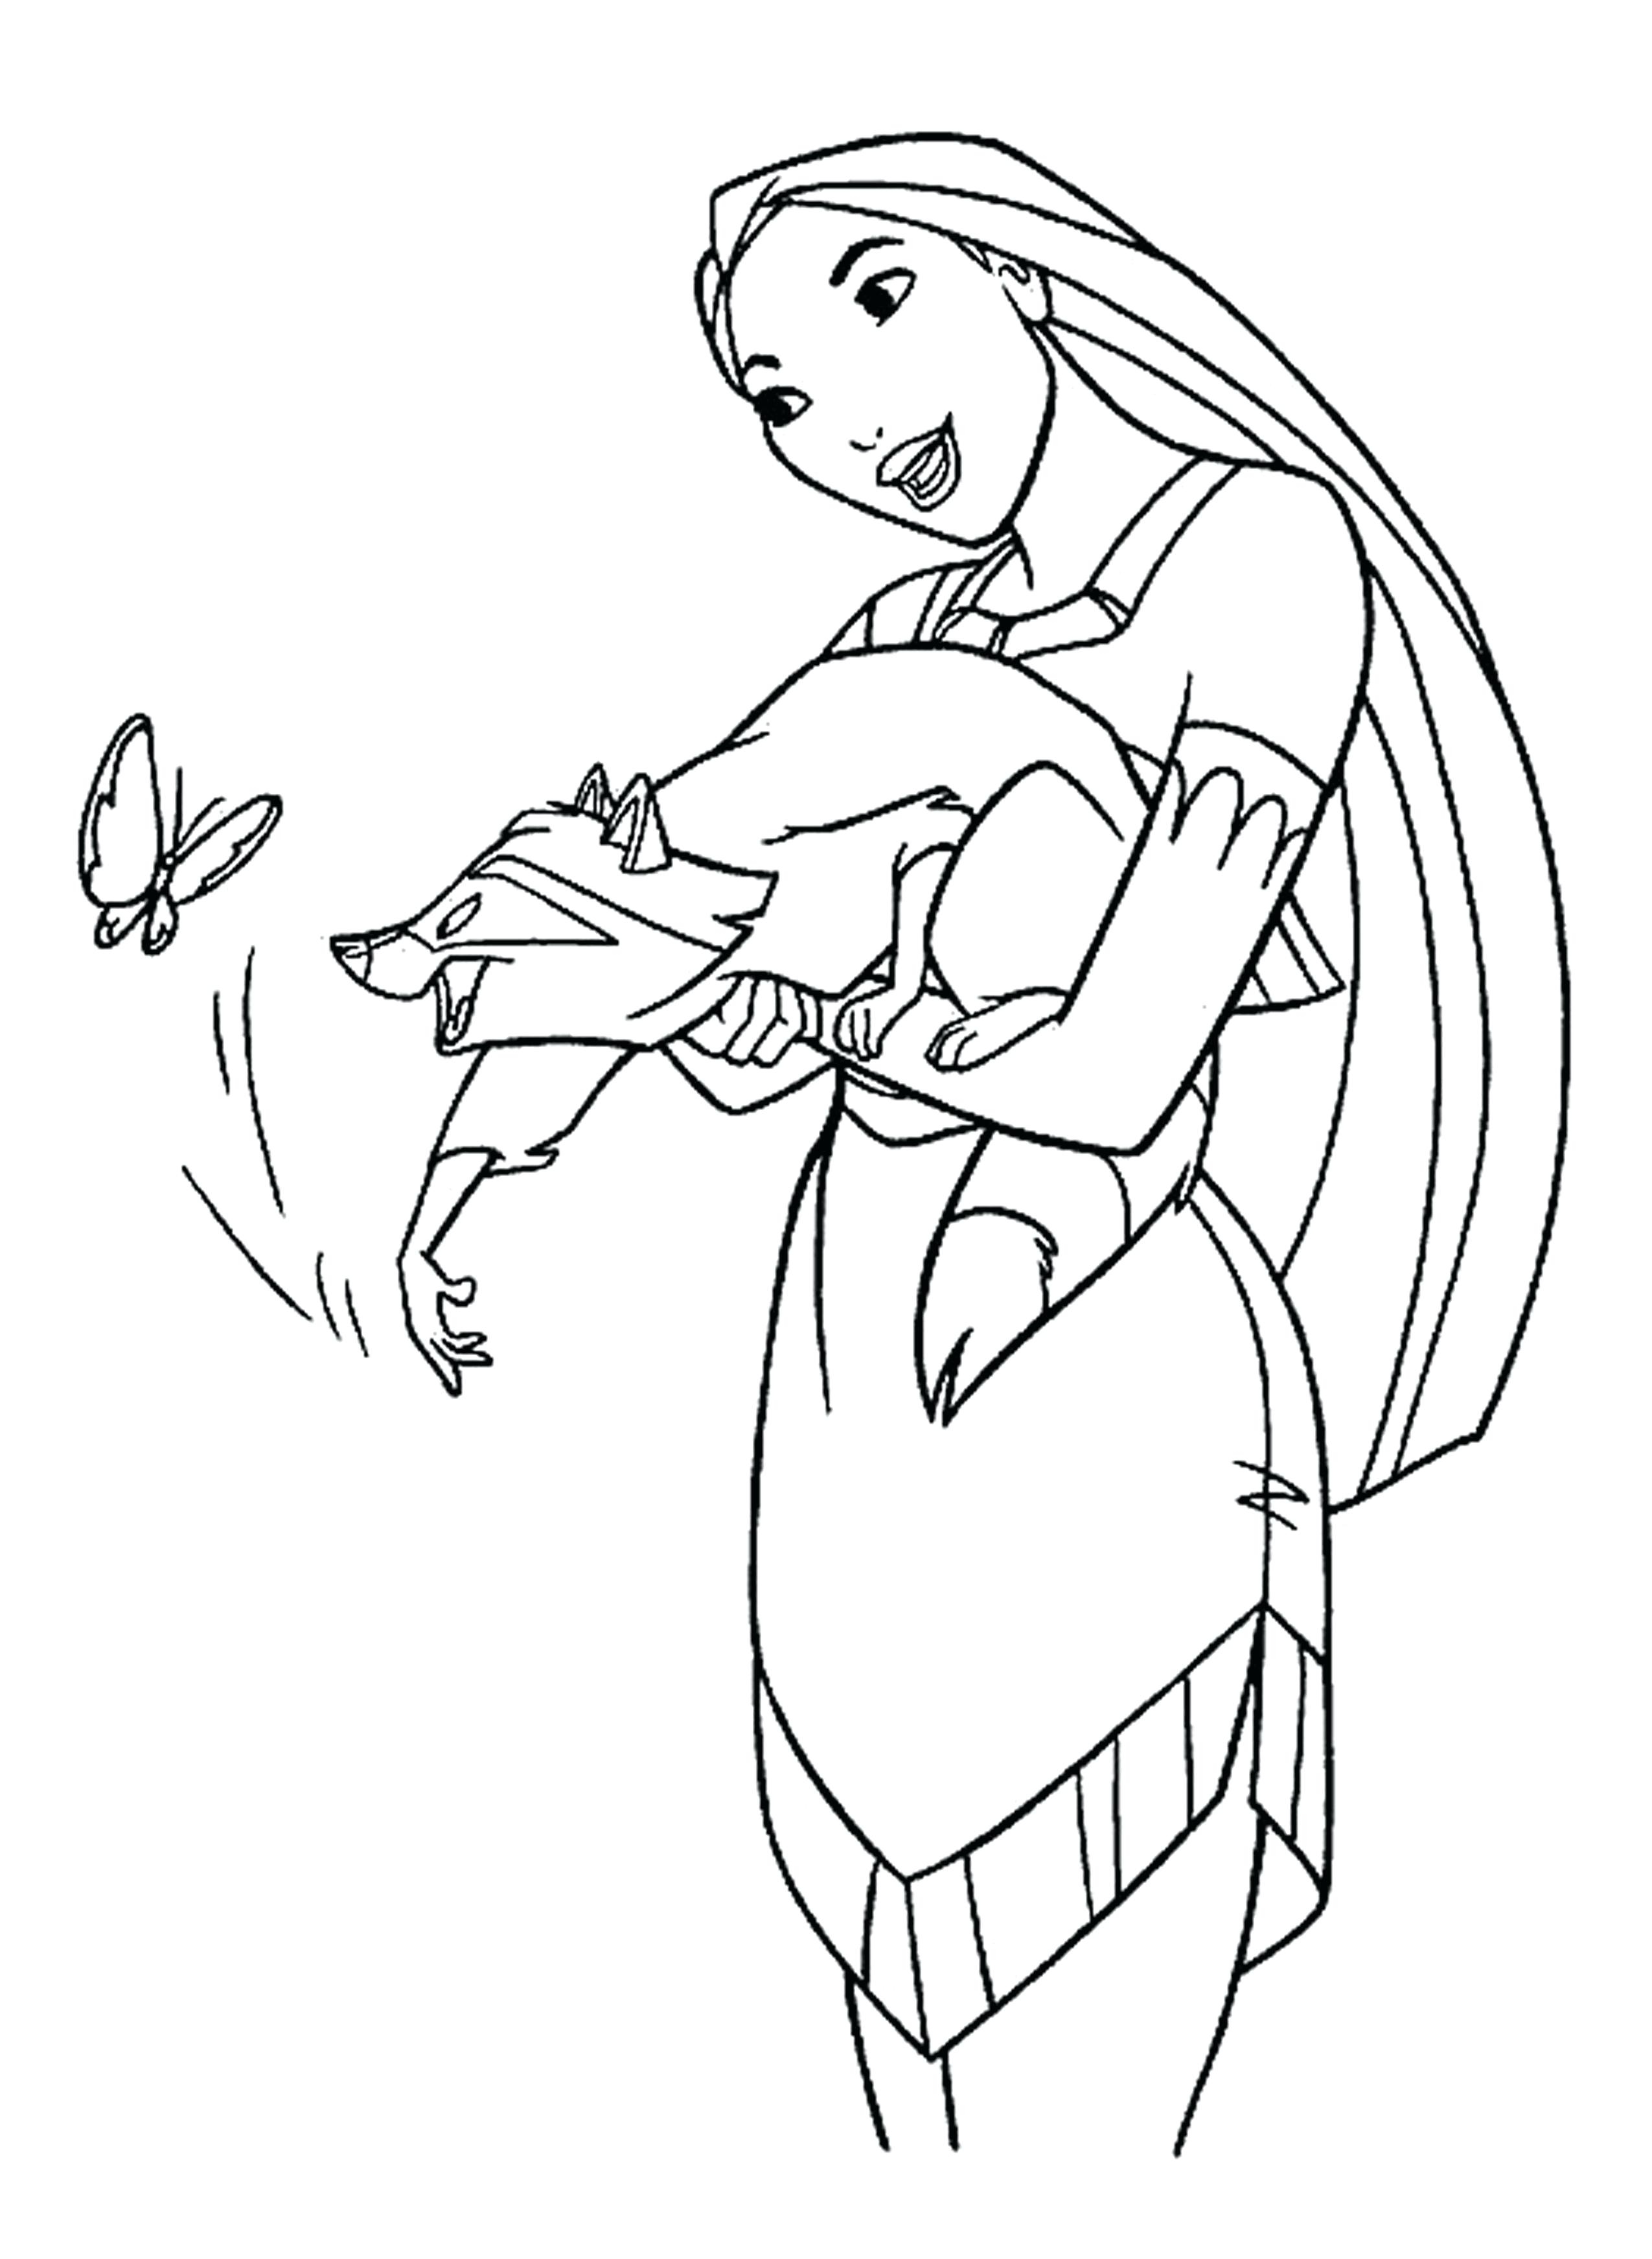 Pocahontas And John Smith Coloring Pages at GetColorings.com | Free